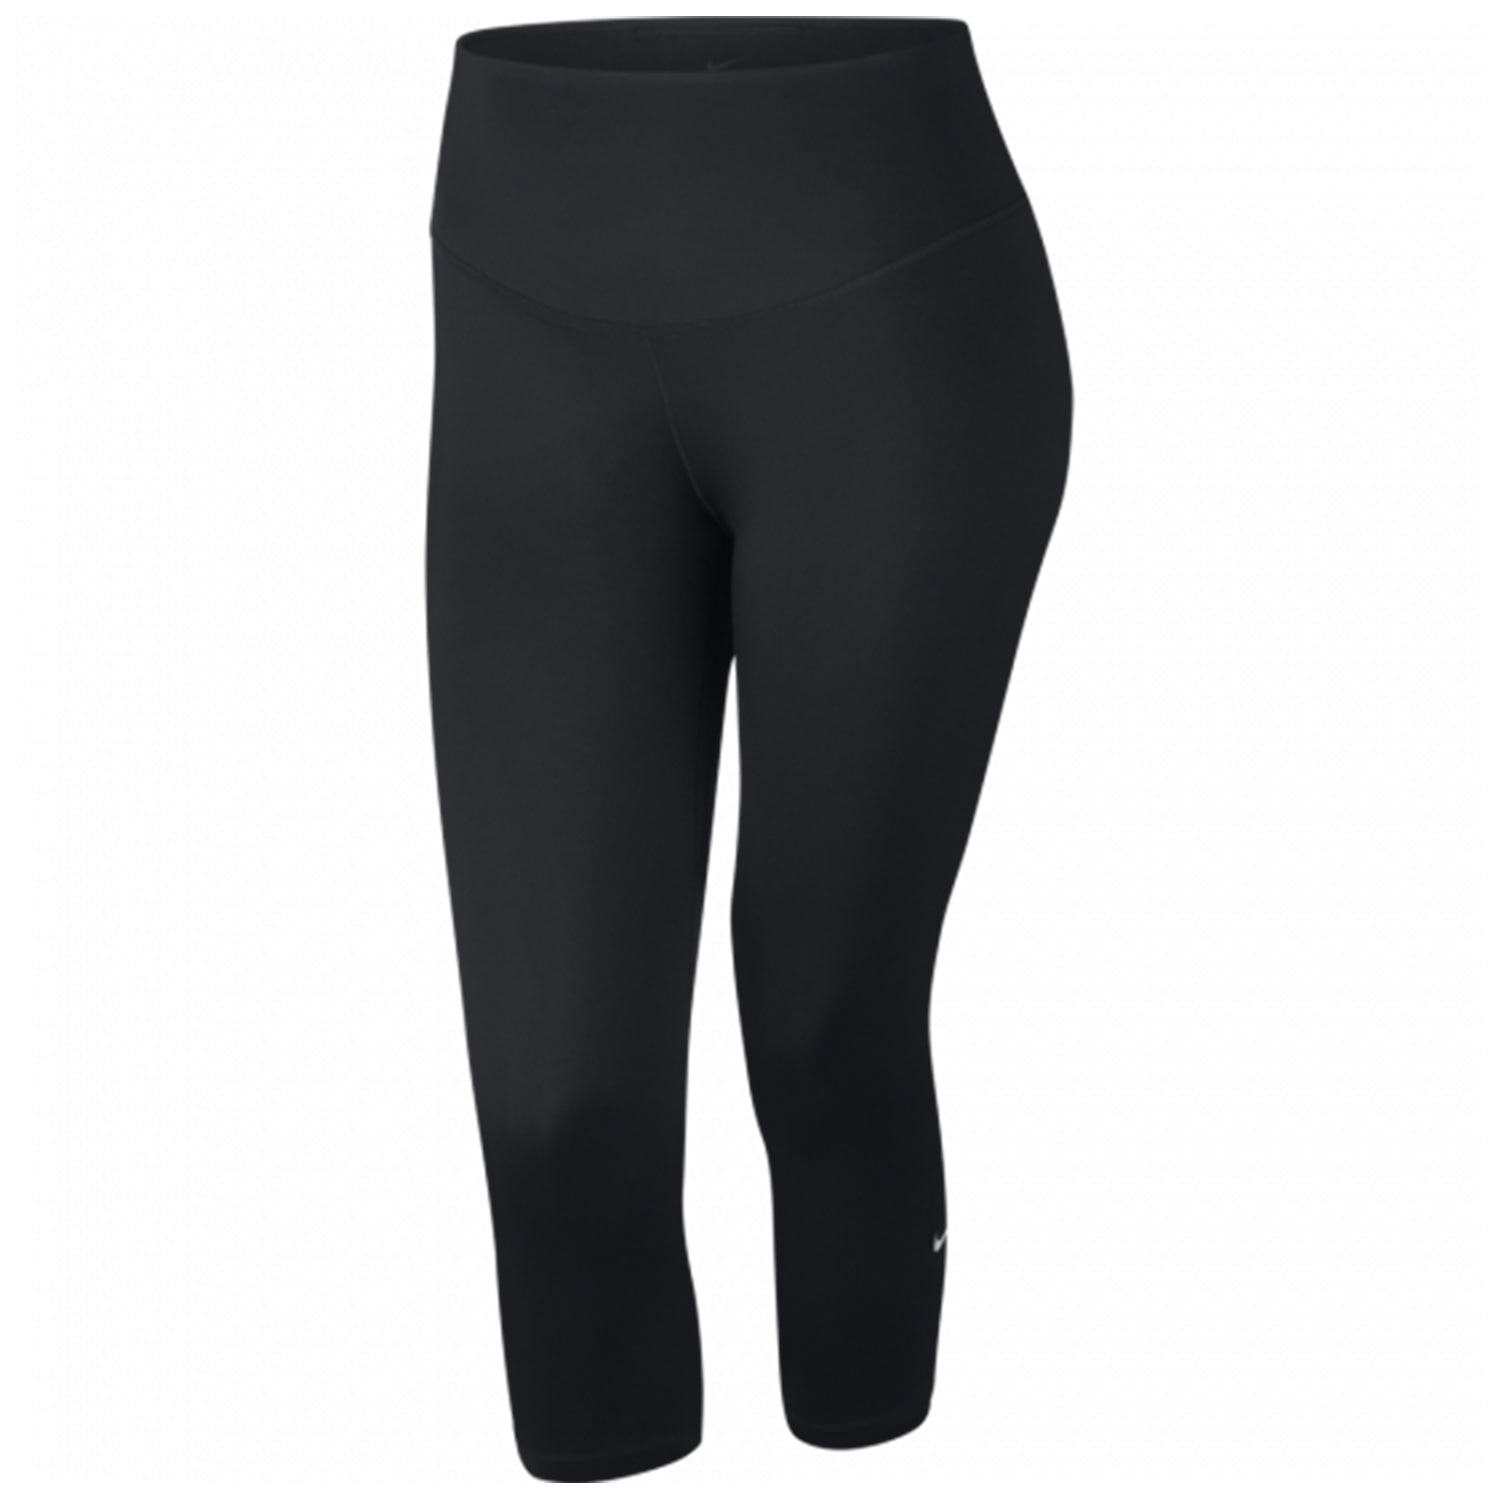 Nike Women's Mid-Rise Tights Plus Size Nike One Luxe CU2916 010